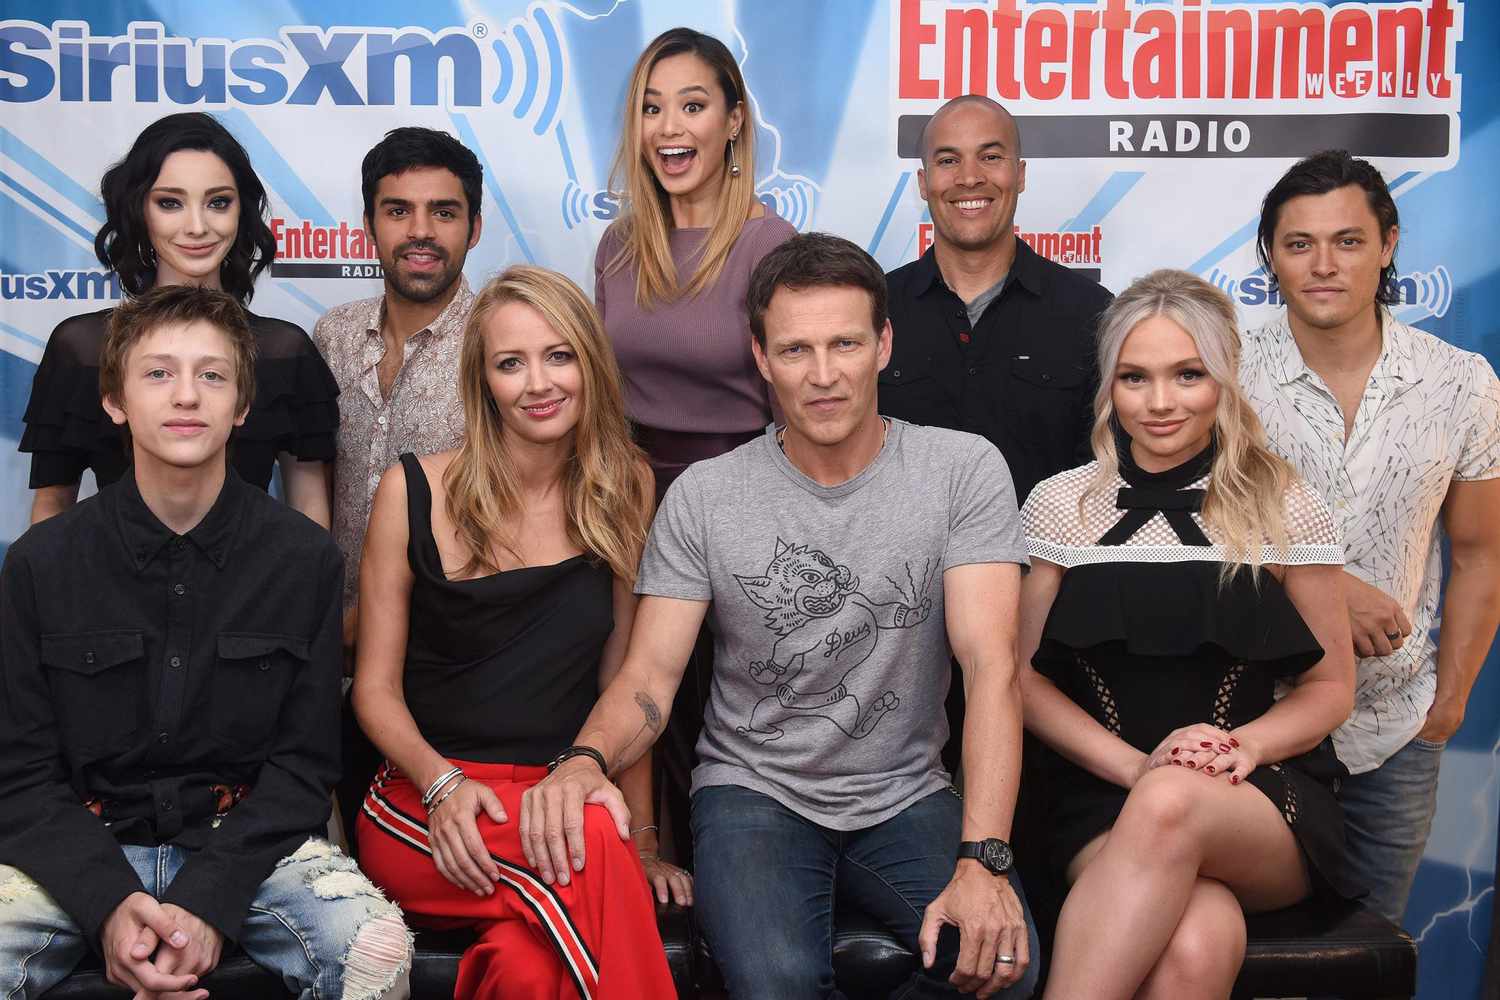 SiriusXM's Entertainment Weekly Radio Channel Broadcasts From Comic Con 2017 - Day 3